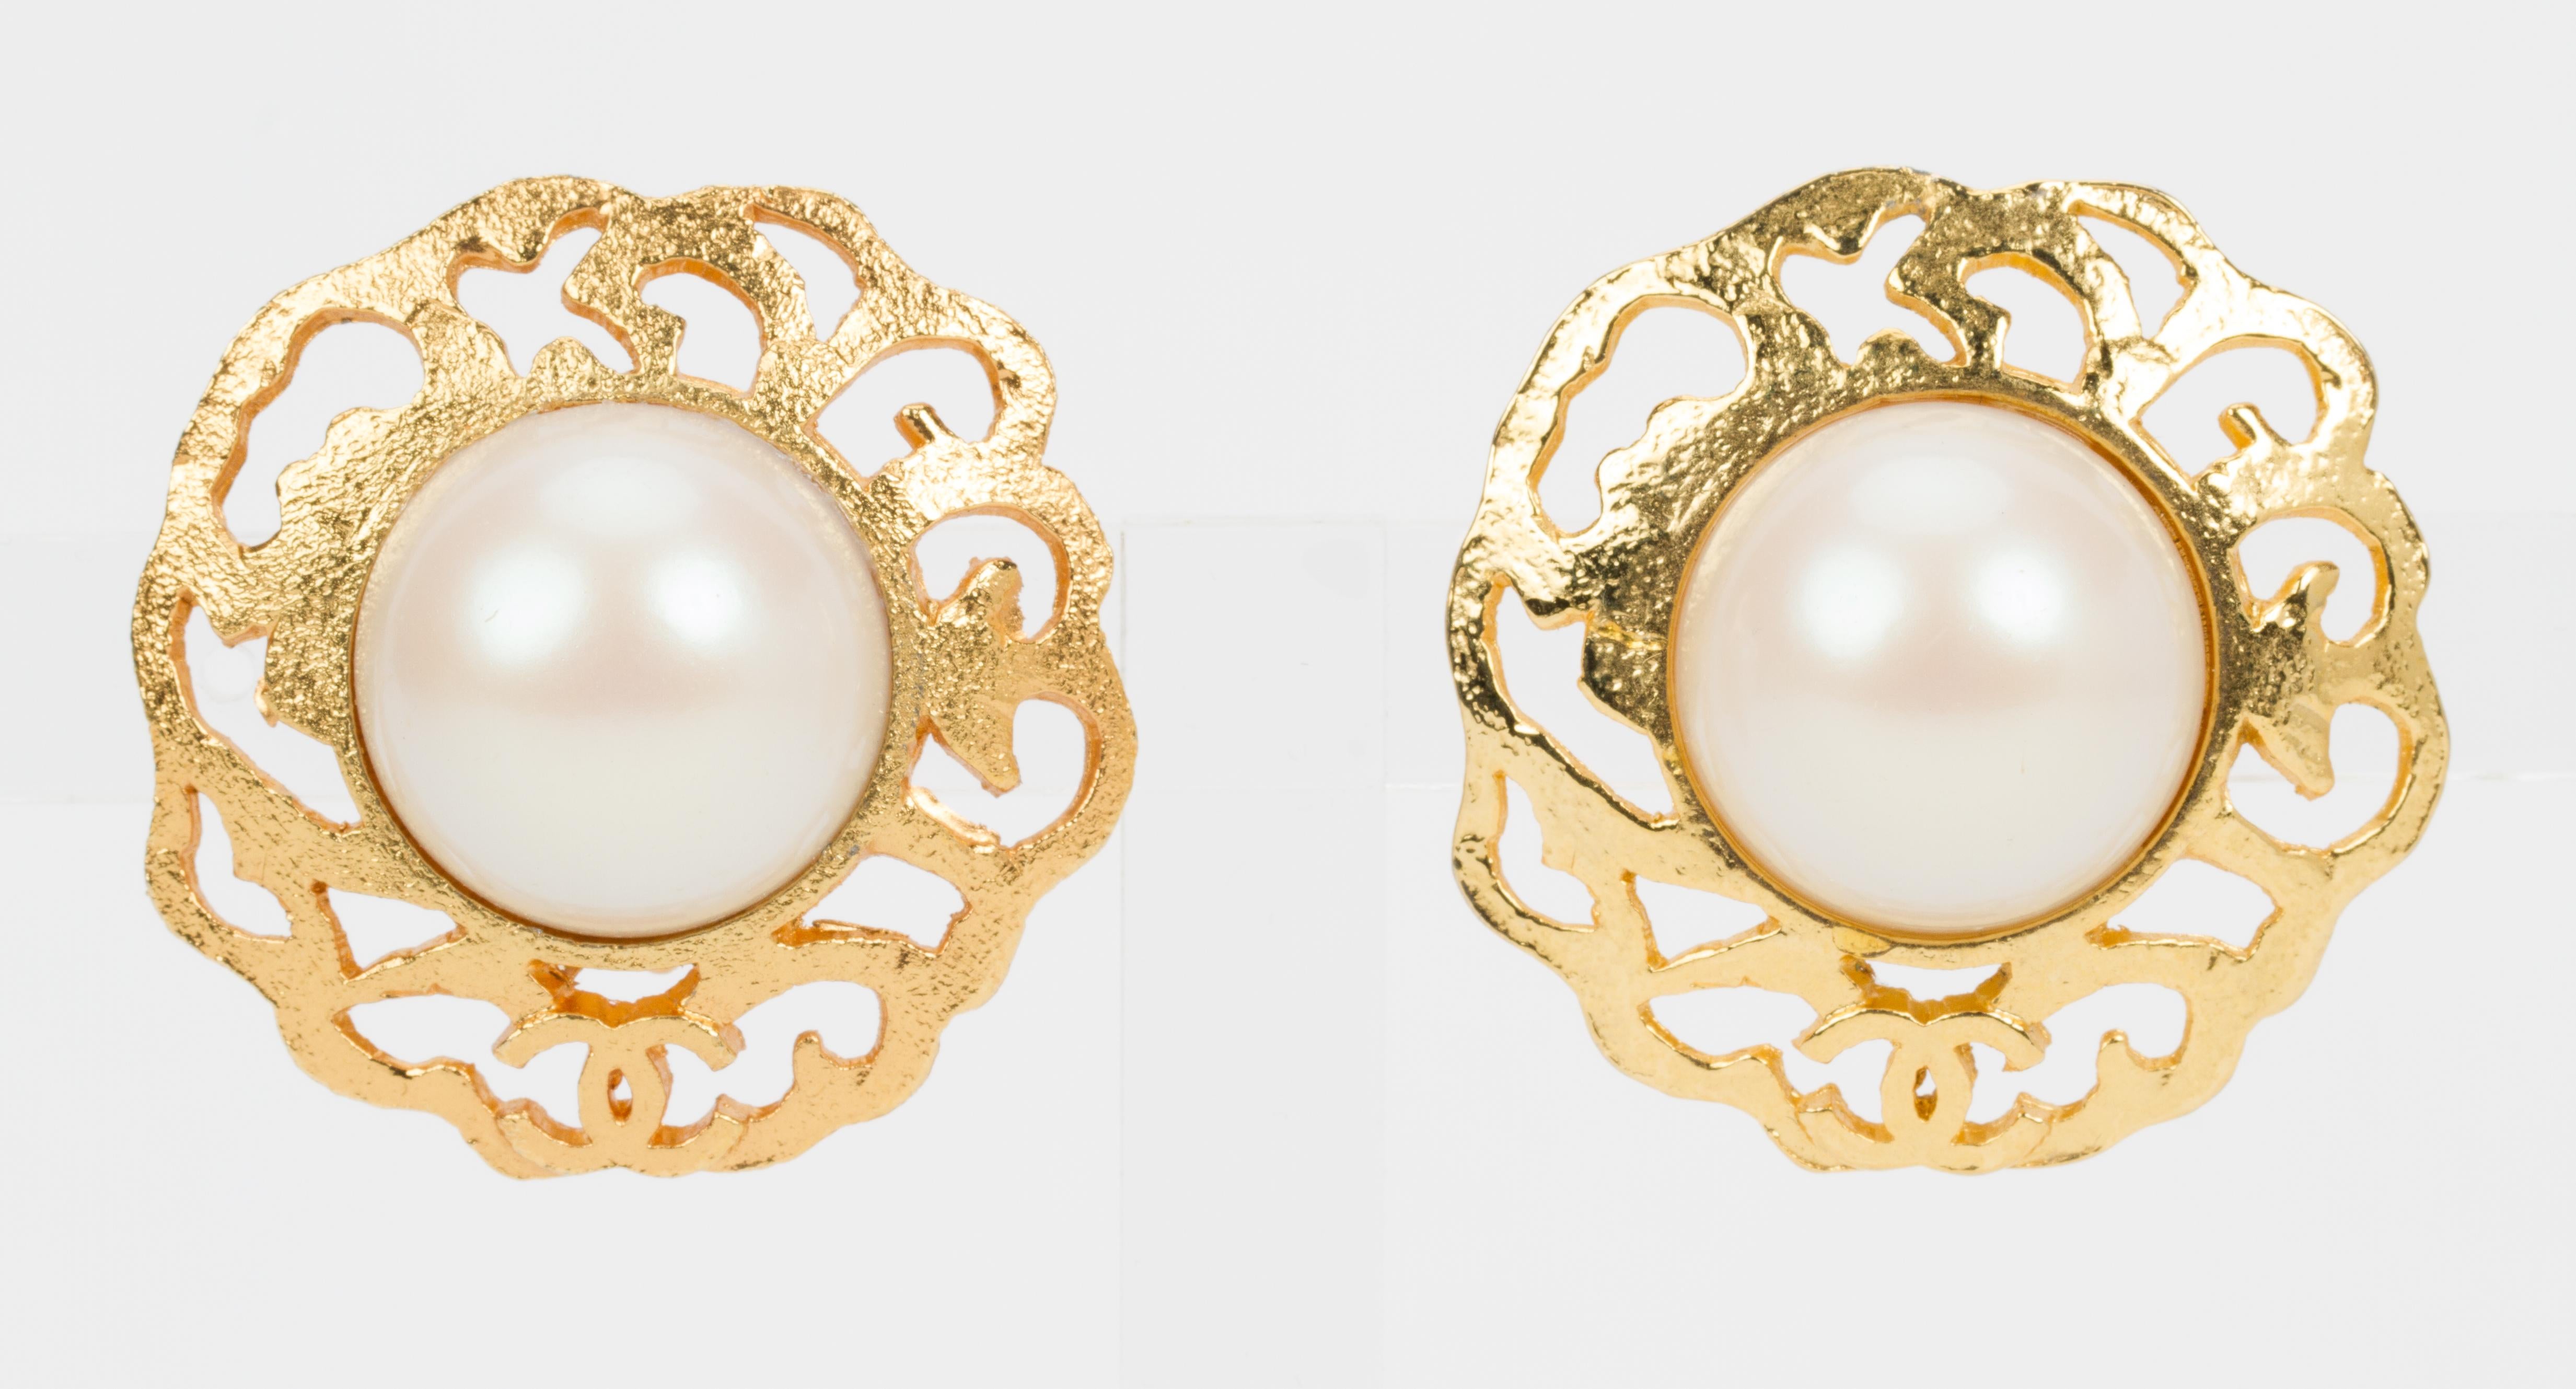 Chanel large satin gold clip earrings with faux mabe pearls center. Collection 25. Comes with original pouch.